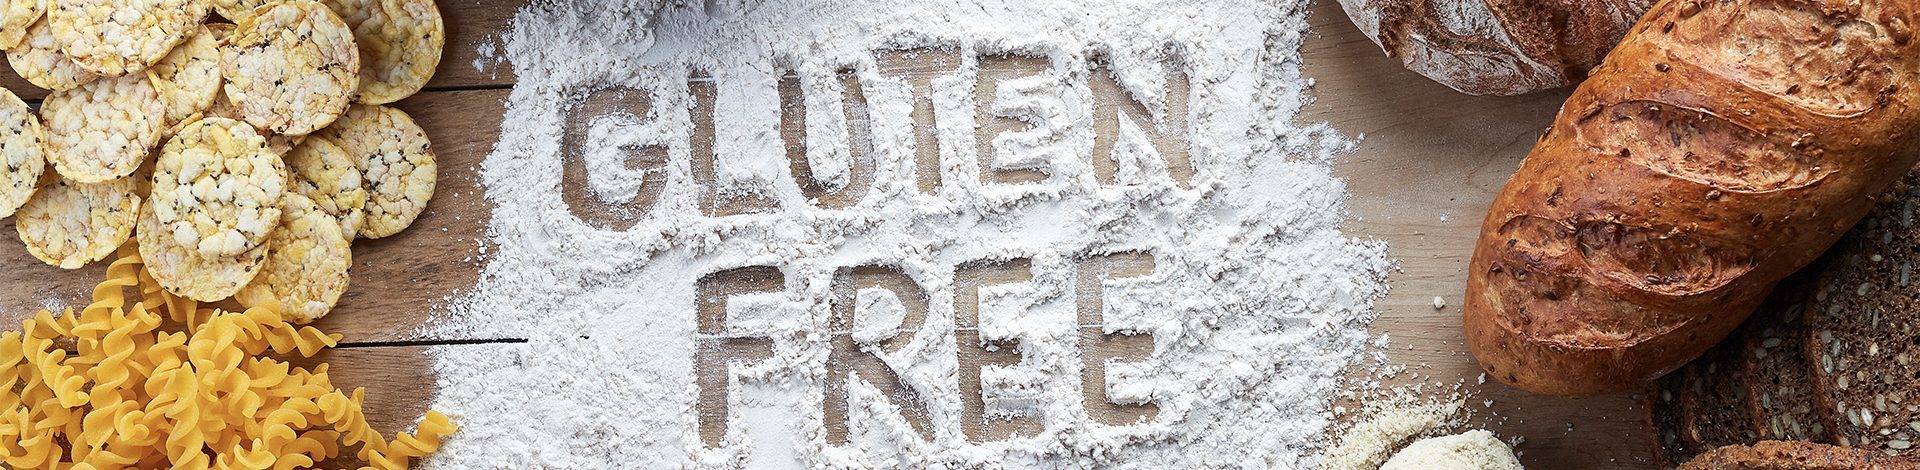 gluten-free bread, pasta and cakes on a messy table that reads 'gluten free' written in spilt flour